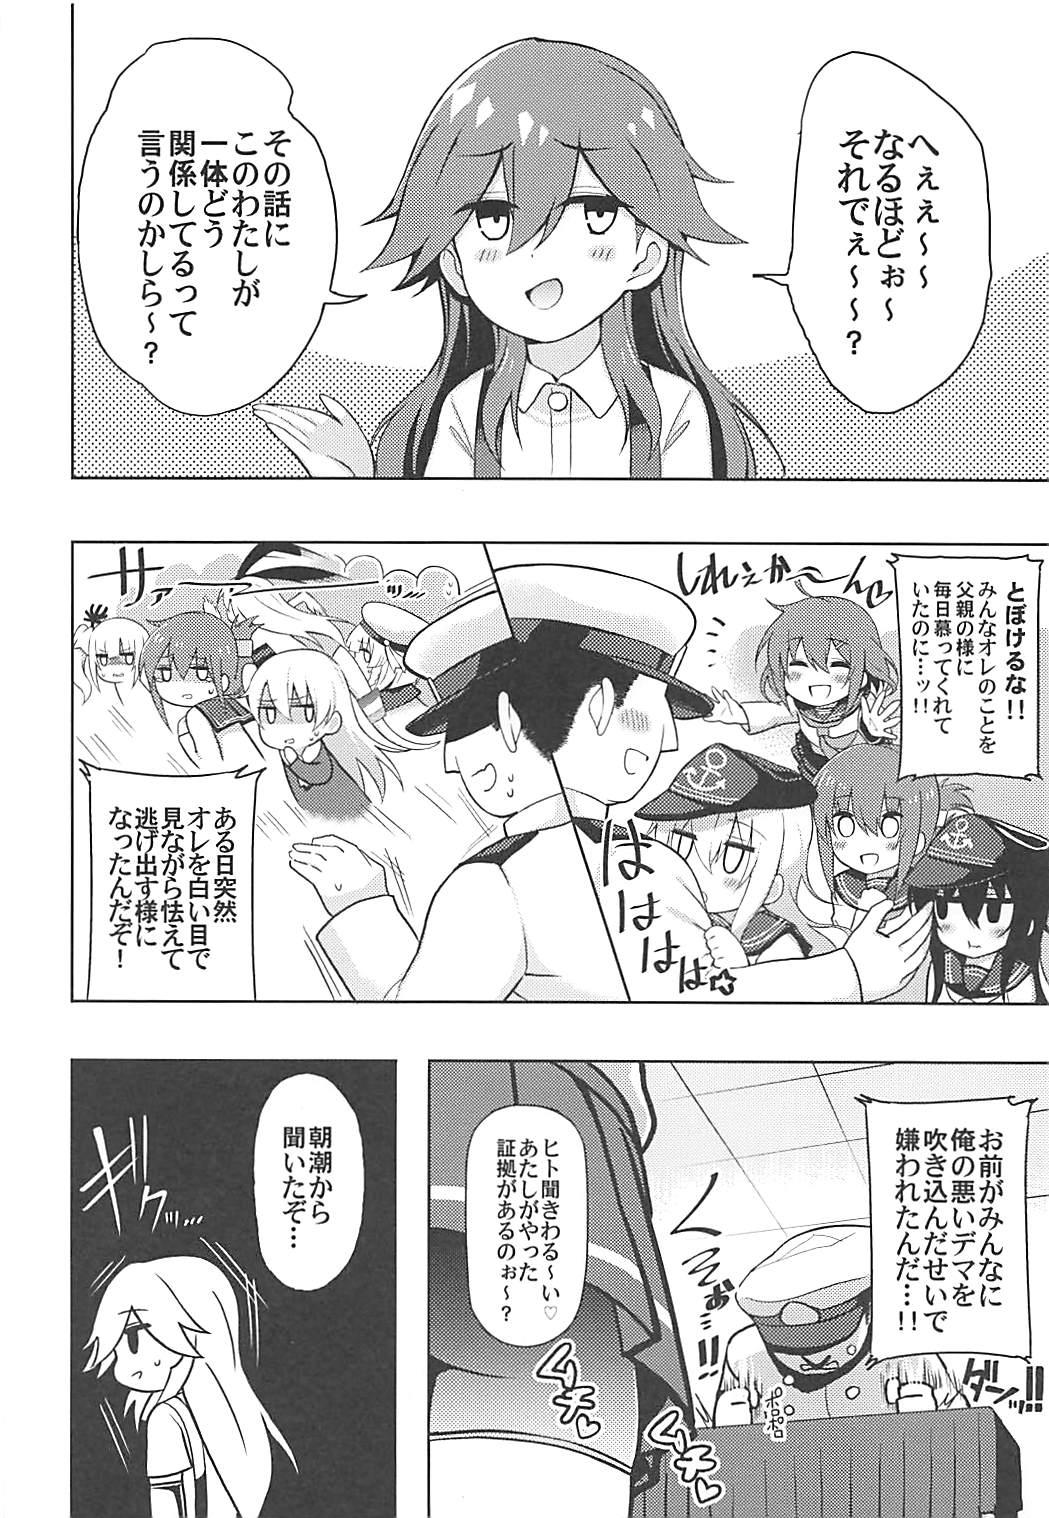 Sexteen Little Girl Sweet Trap! - Kantai collection Cosplay - Page 3